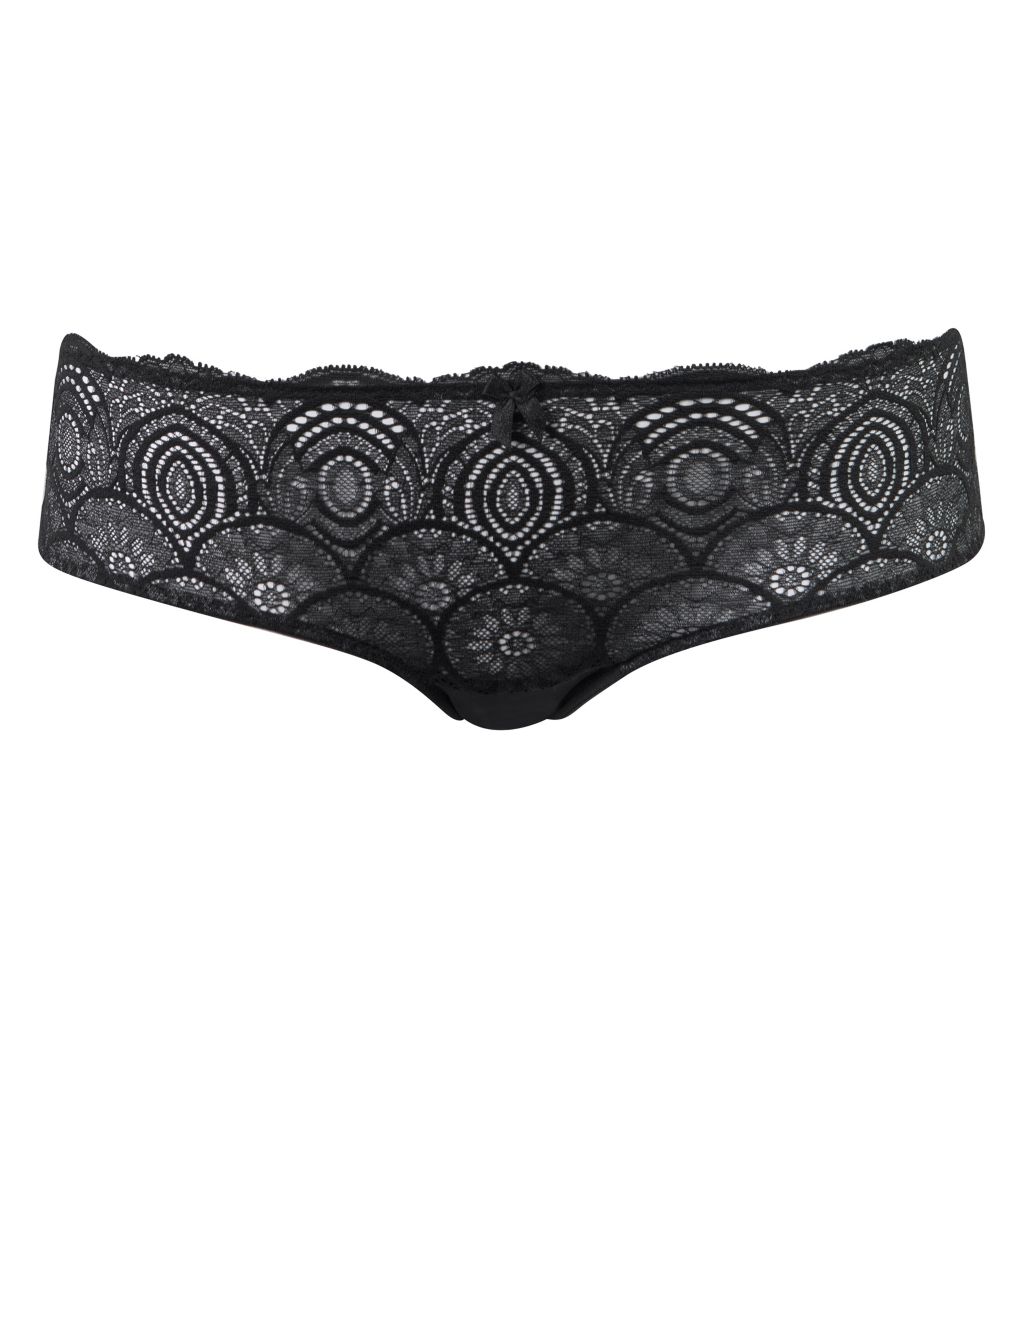 Refined Glamour All Over Lace Shorts | Wonderbra | M&S